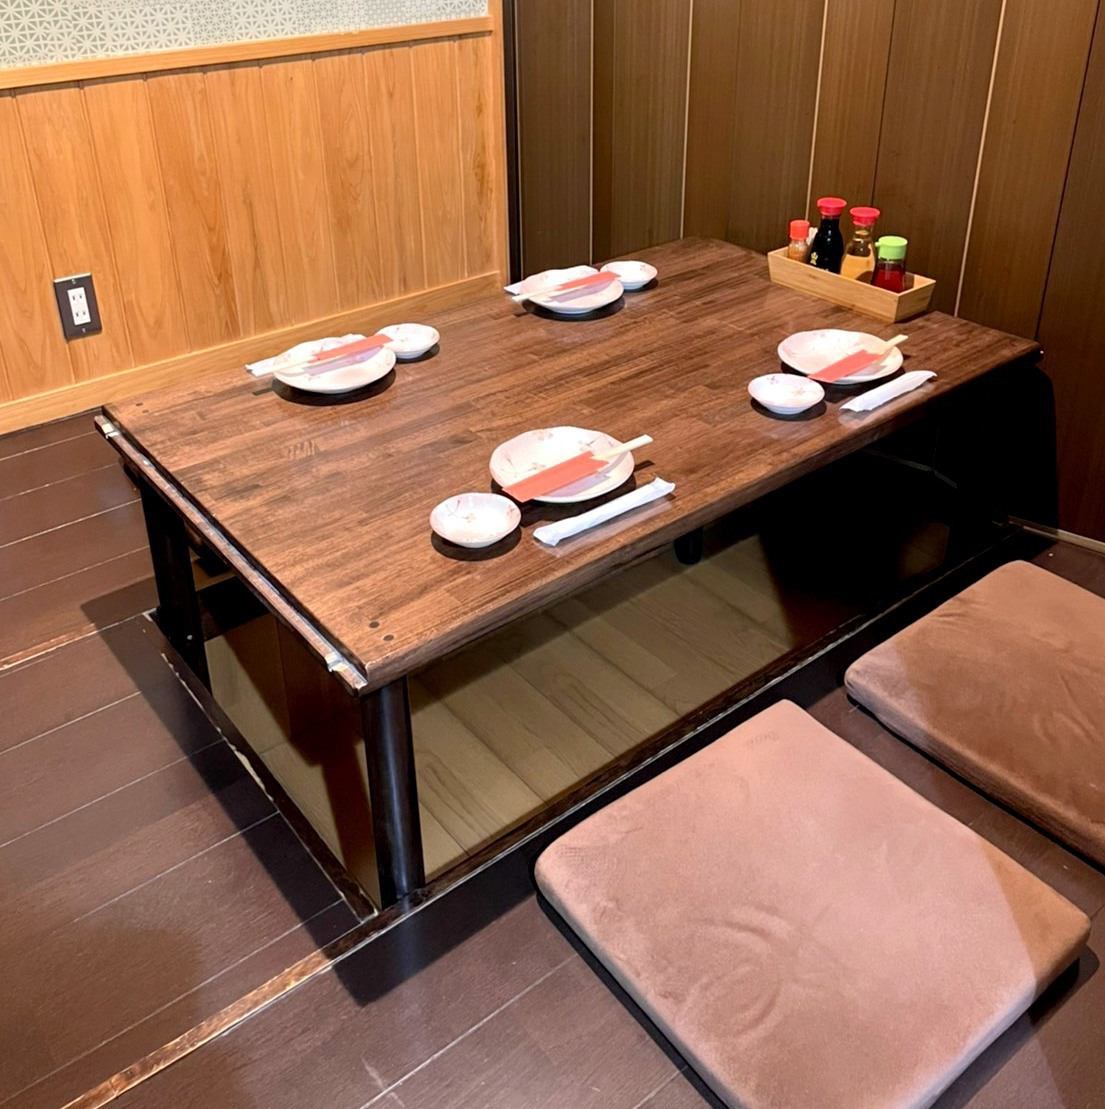 Equipped with tatami mat seating! Enjoy a leisurely meal with your child or family!